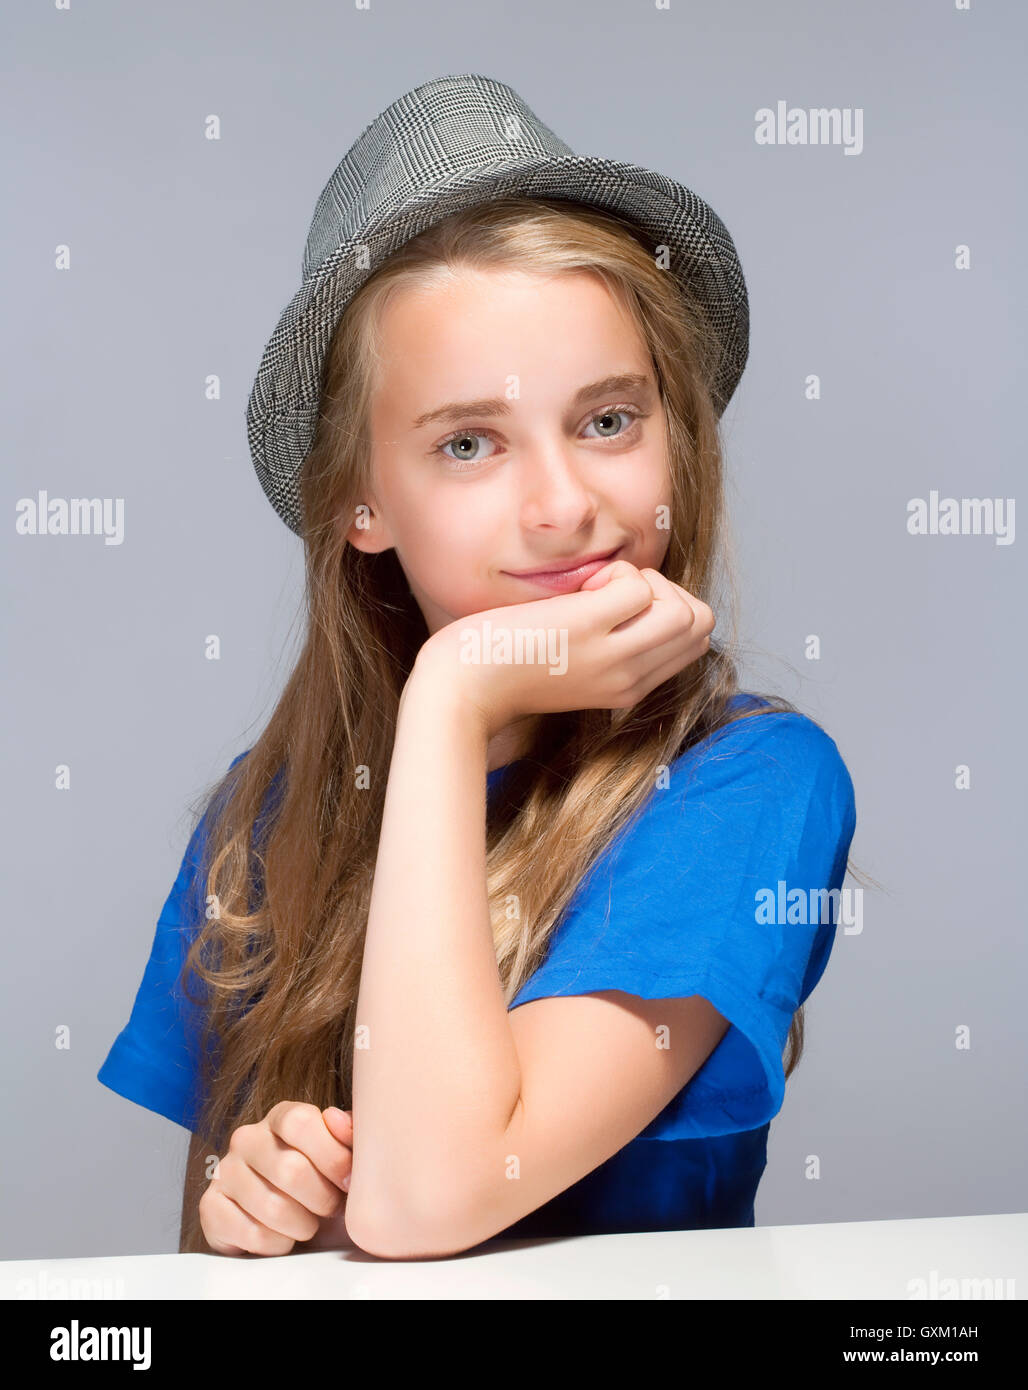 Portrait of a Beautiful Young Girl with Long Blond Hair Stock Photo